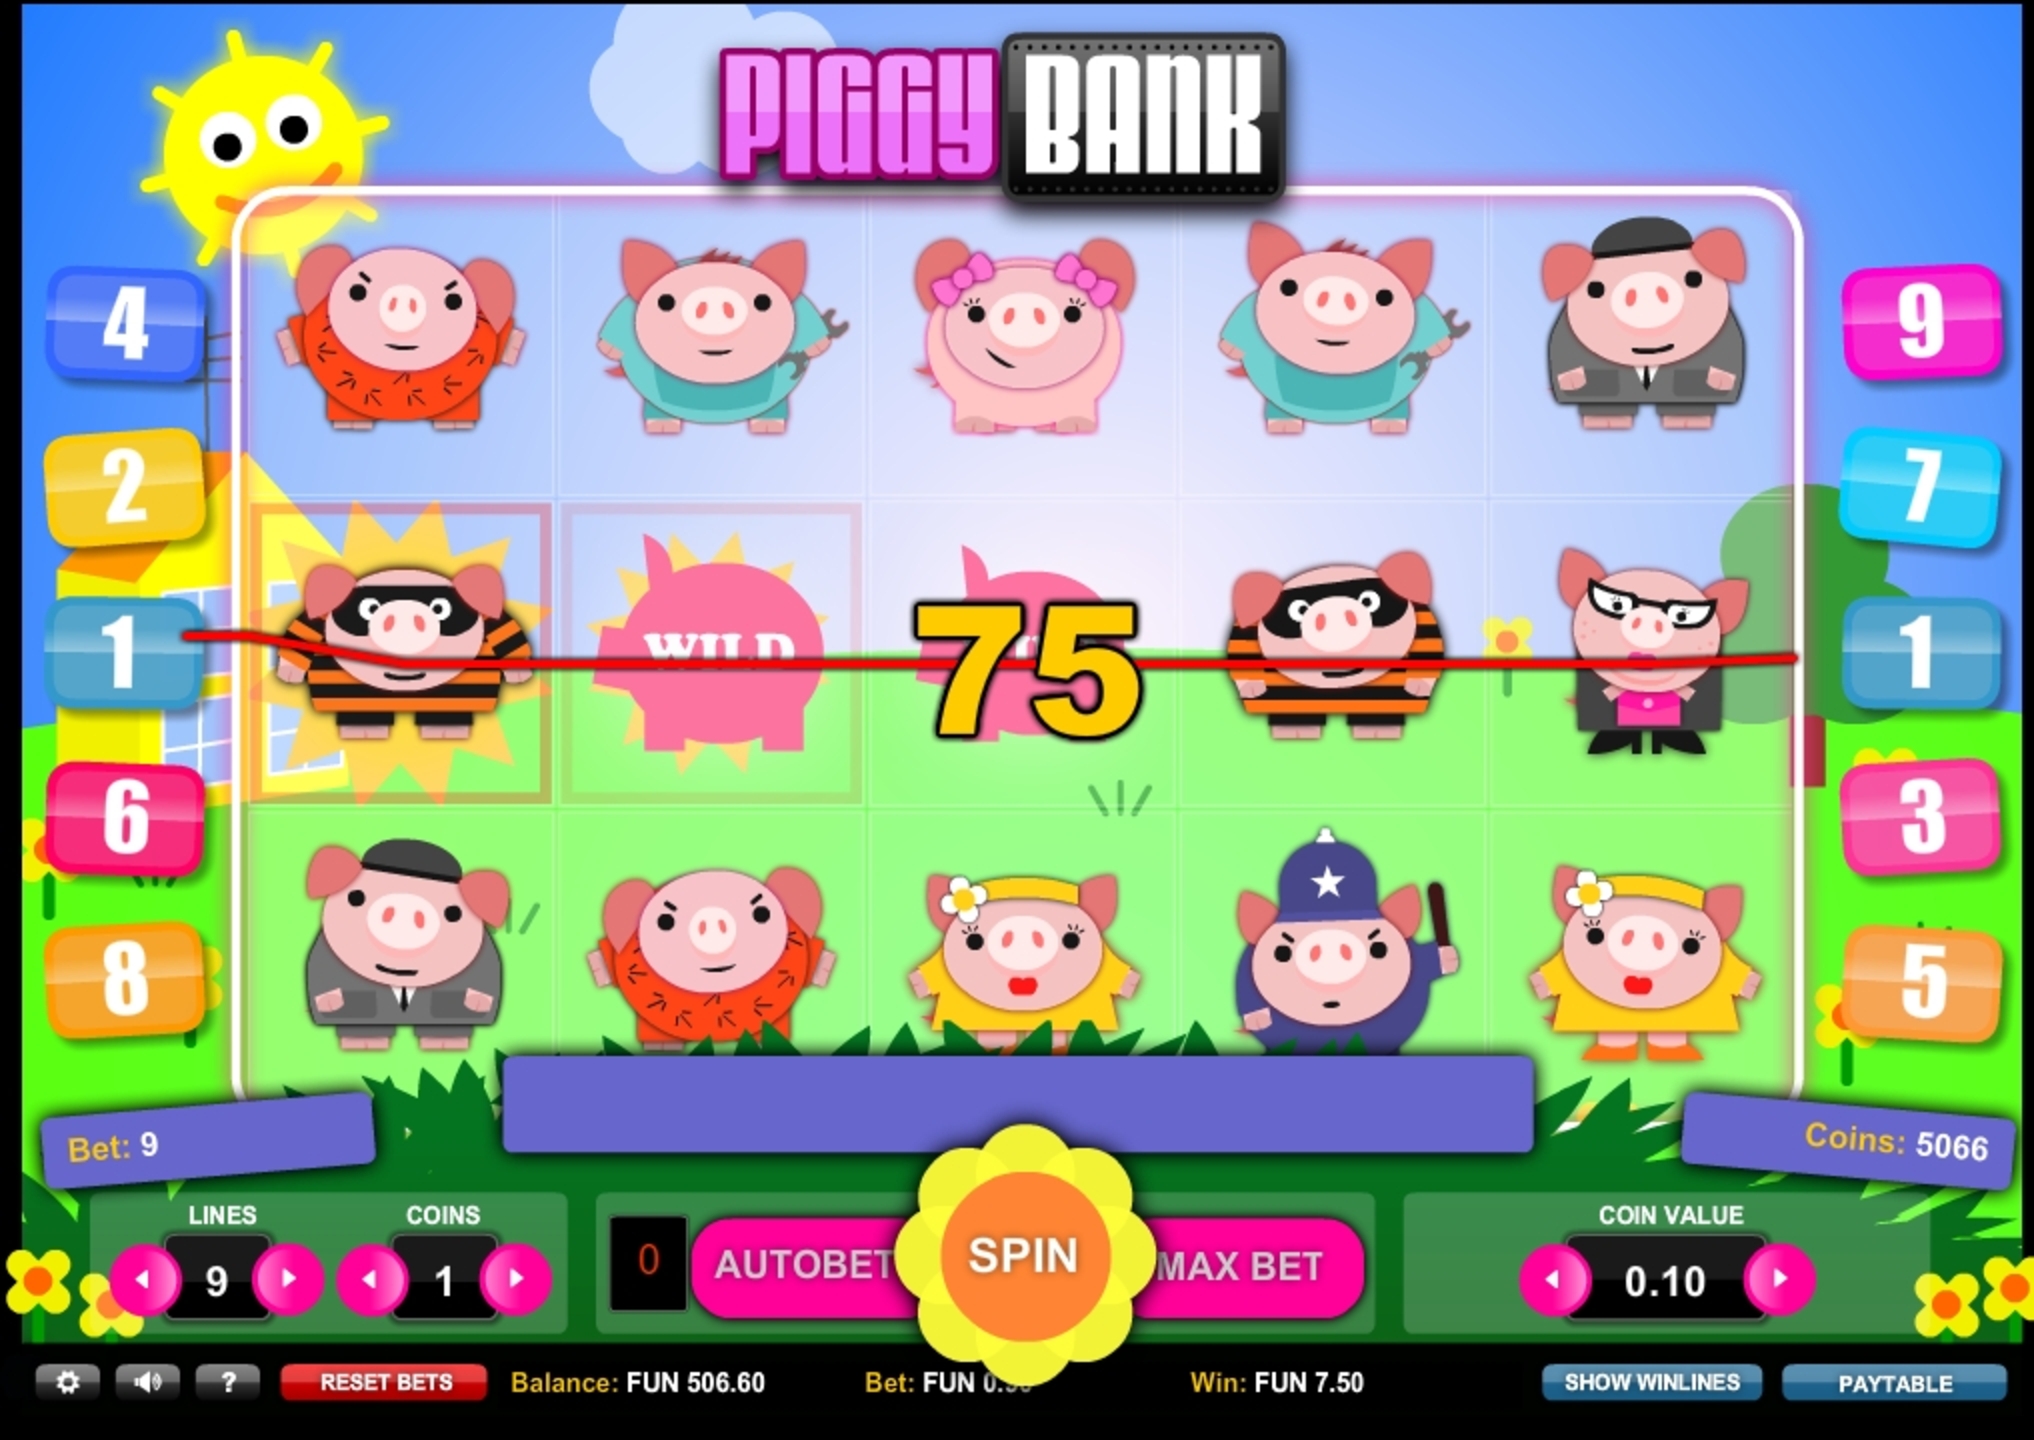 Win Money in Piggy Bank Free Slot Game by Playn GO